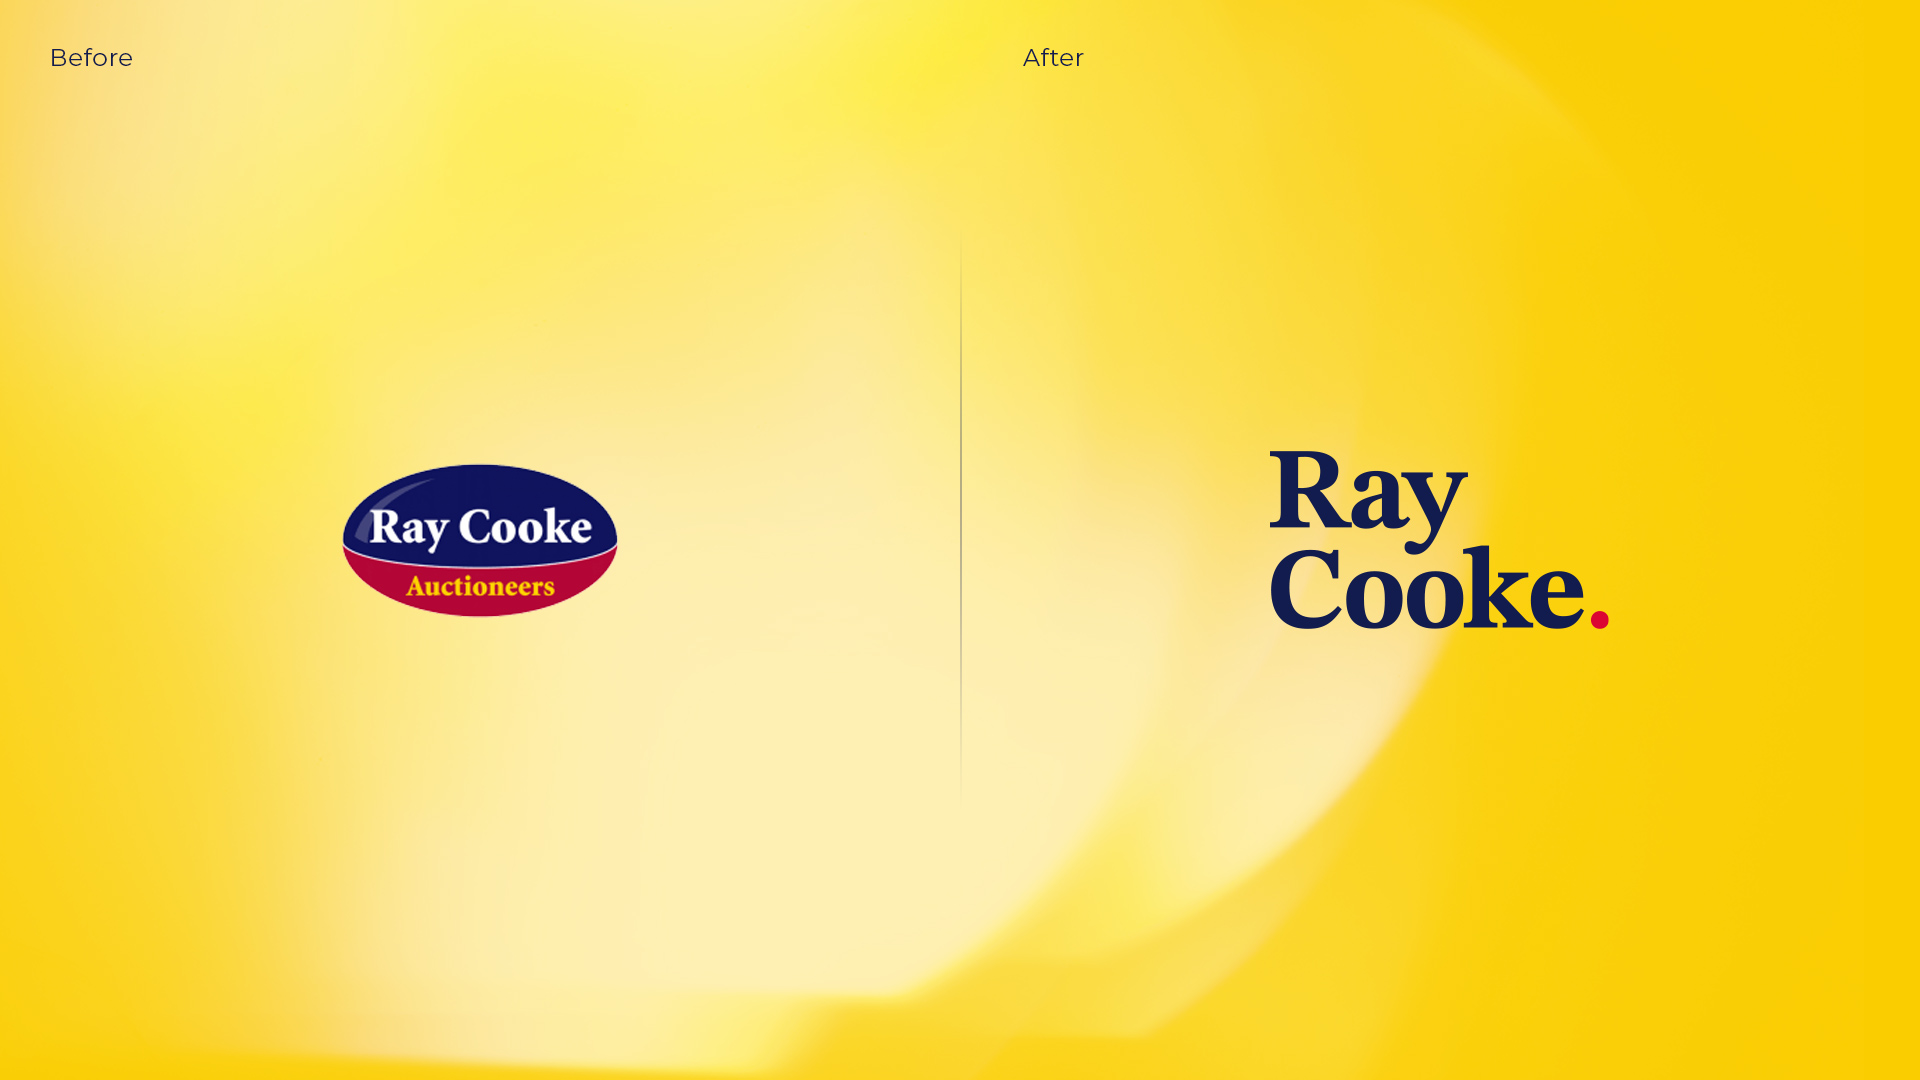 RayCooke-Before-After